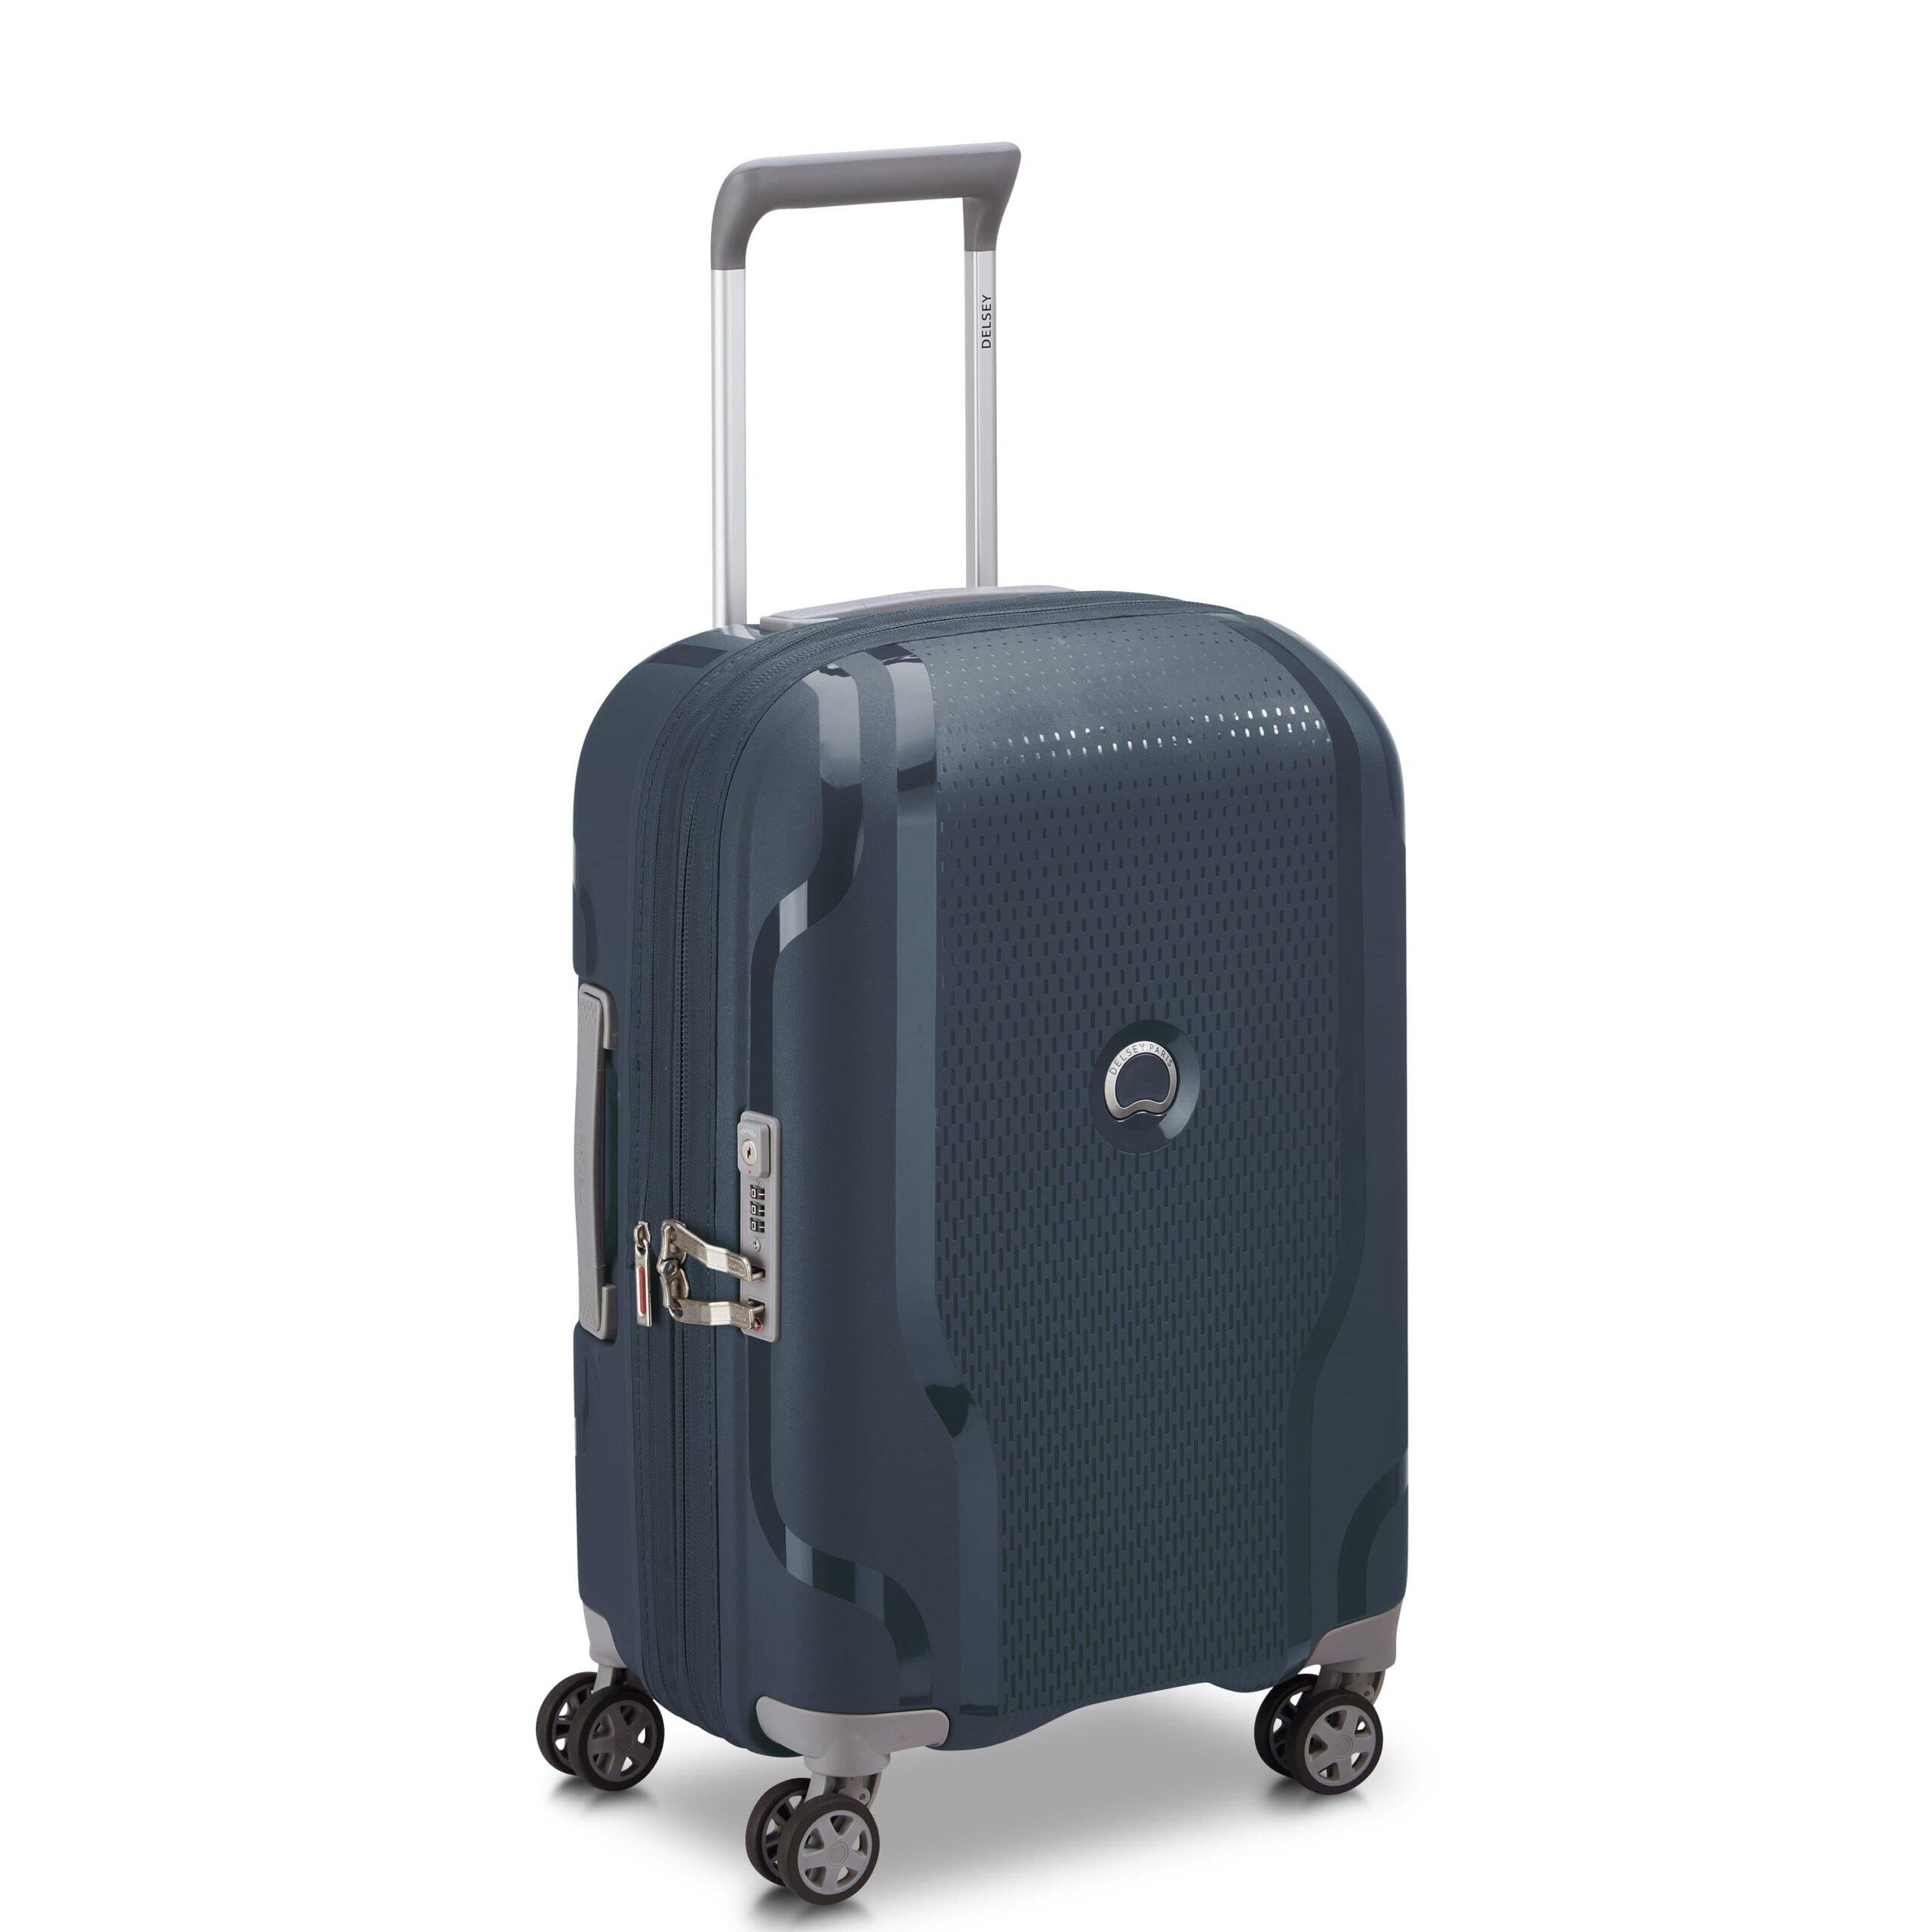 Delsey Clavel 55cm Hardcase 4 Double Wheel Expandable Cabin Luggage Trolley Blue Jean - 00384580102